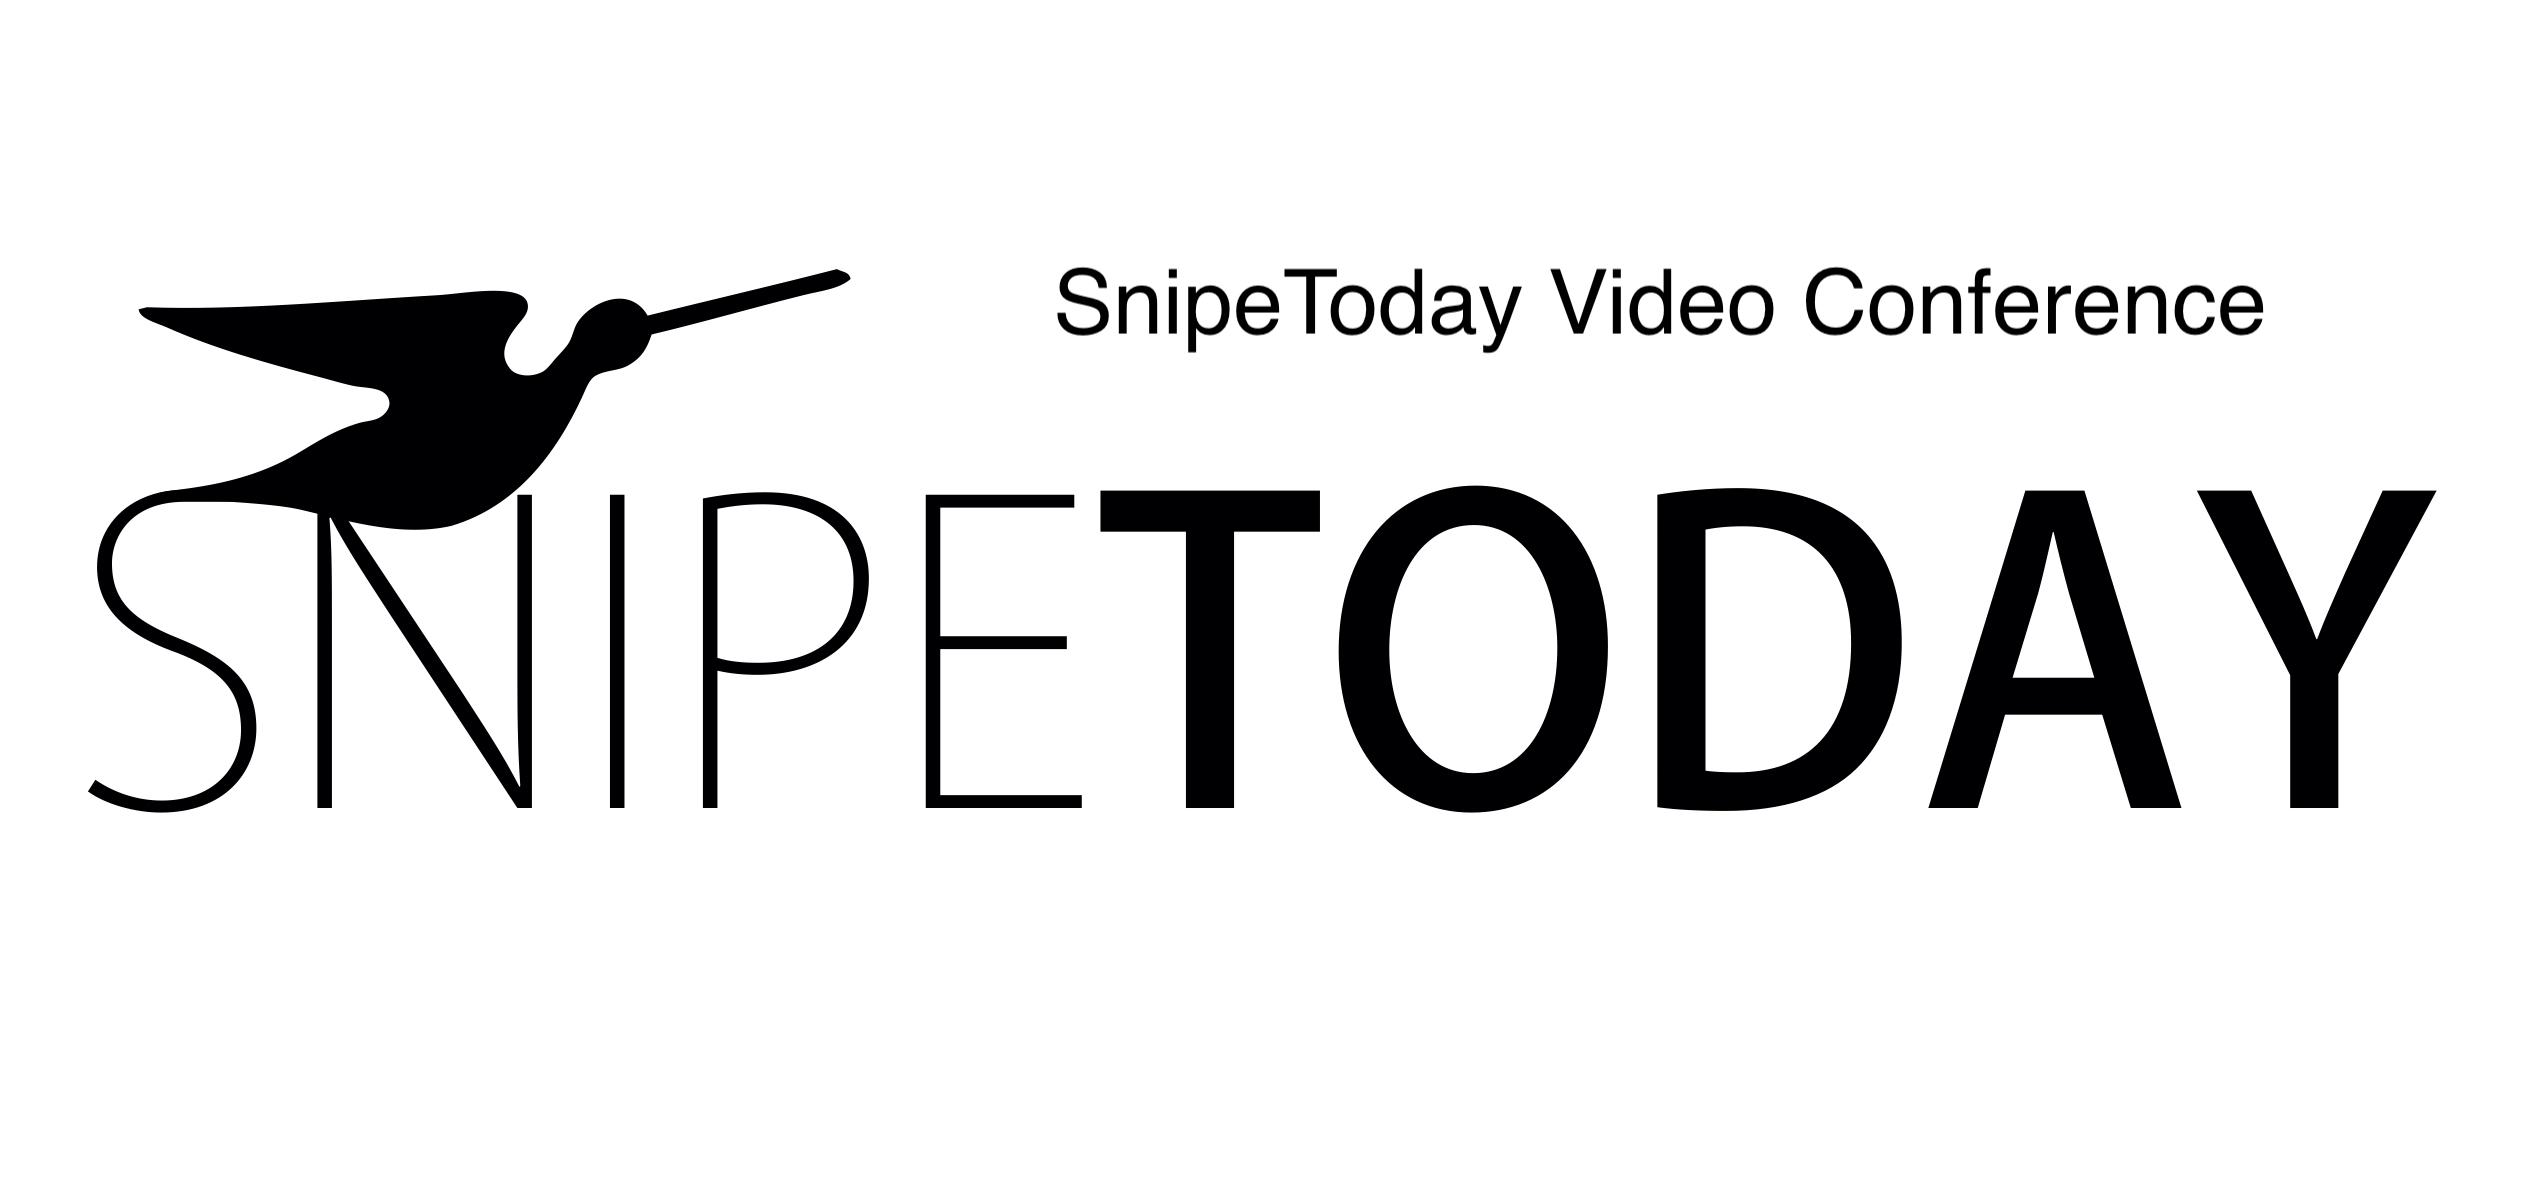 SnipeToday Video Conference: Women’s Snipe Sailing Image